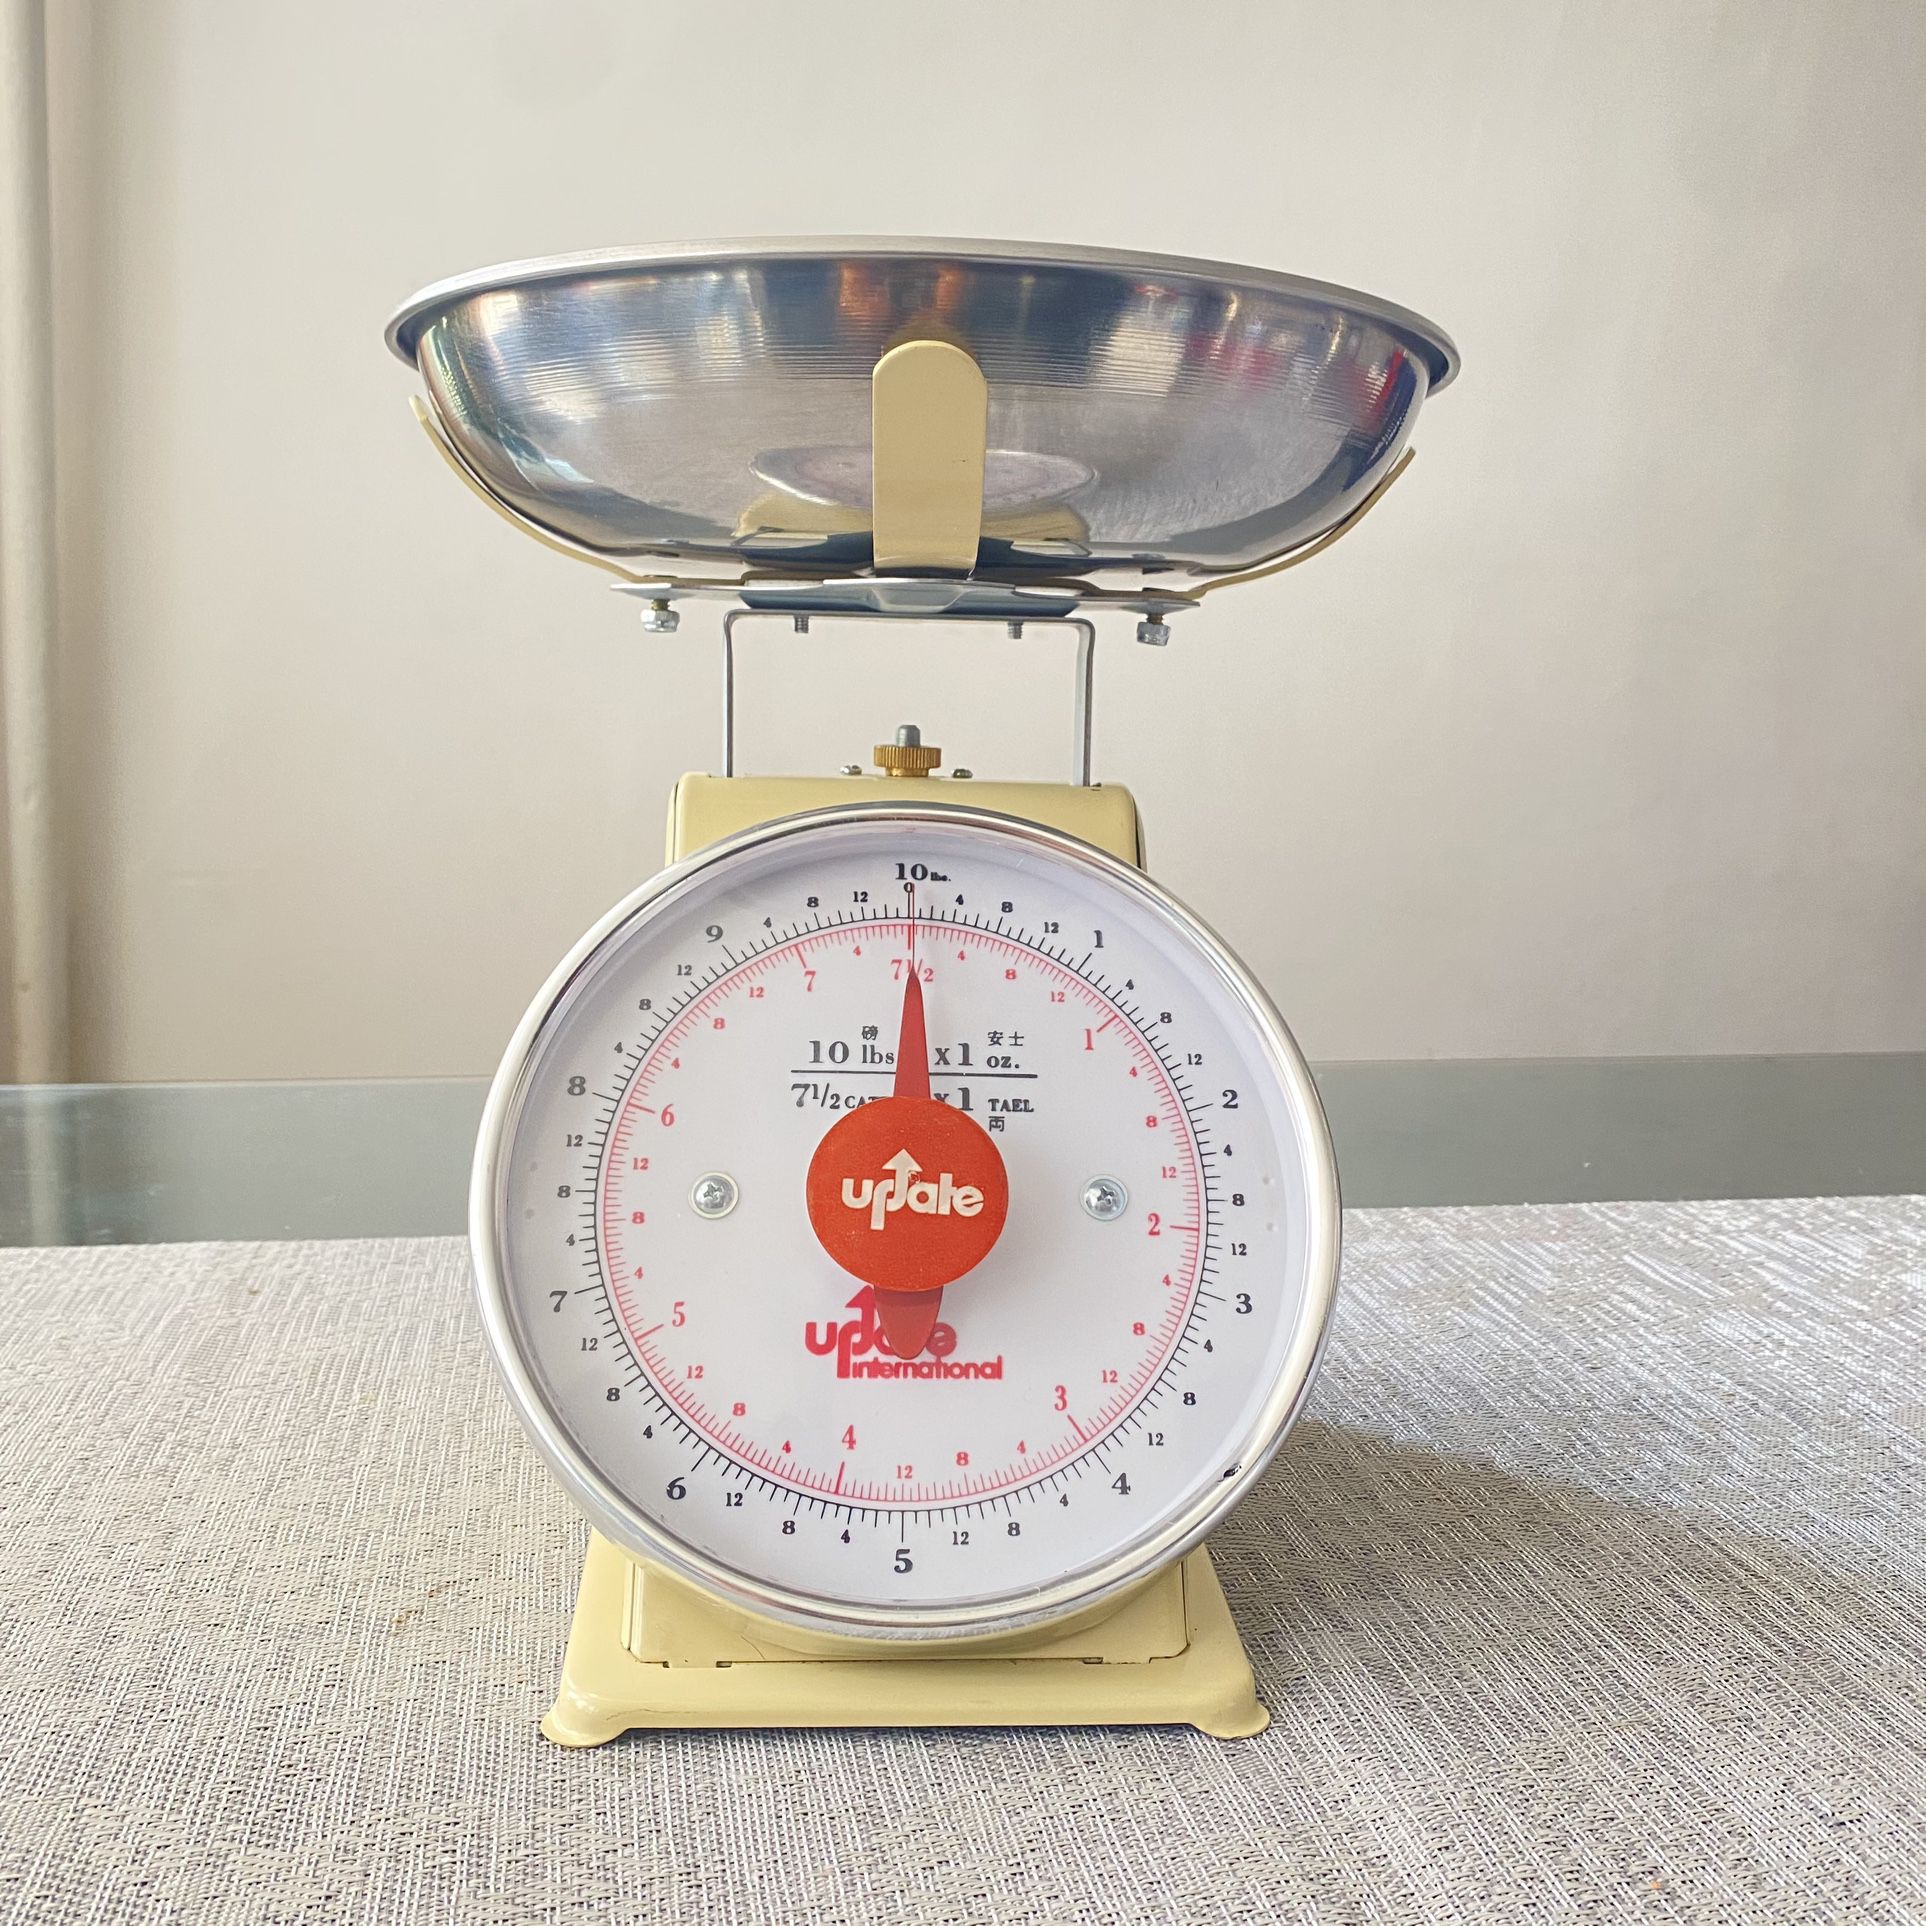 Update UP-710T 7" Fixed Dial Scale - 10 lb Capacity, 1 oz Graduations